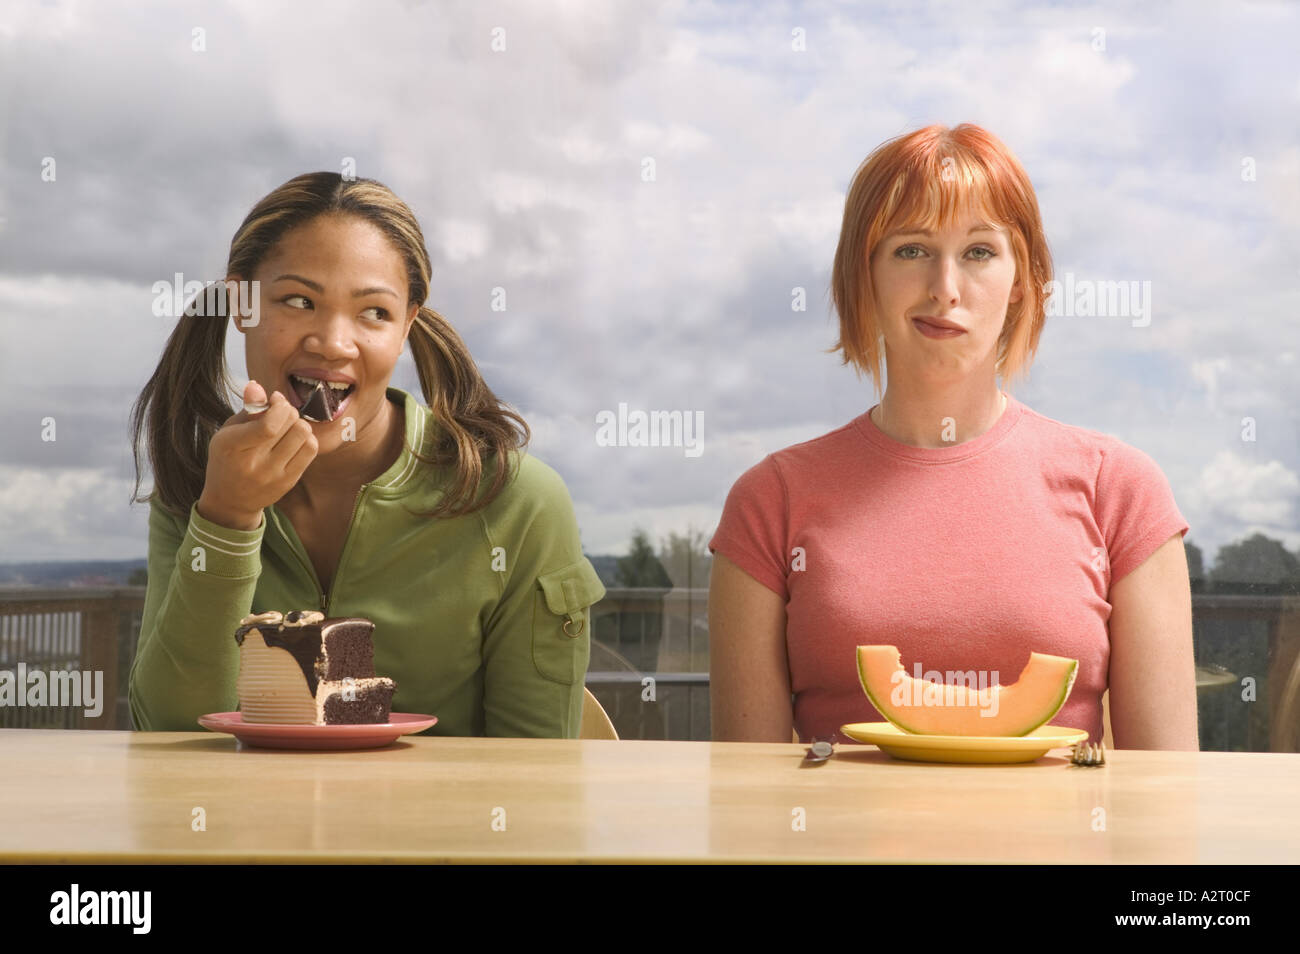 Two women eating different food Stock Photo